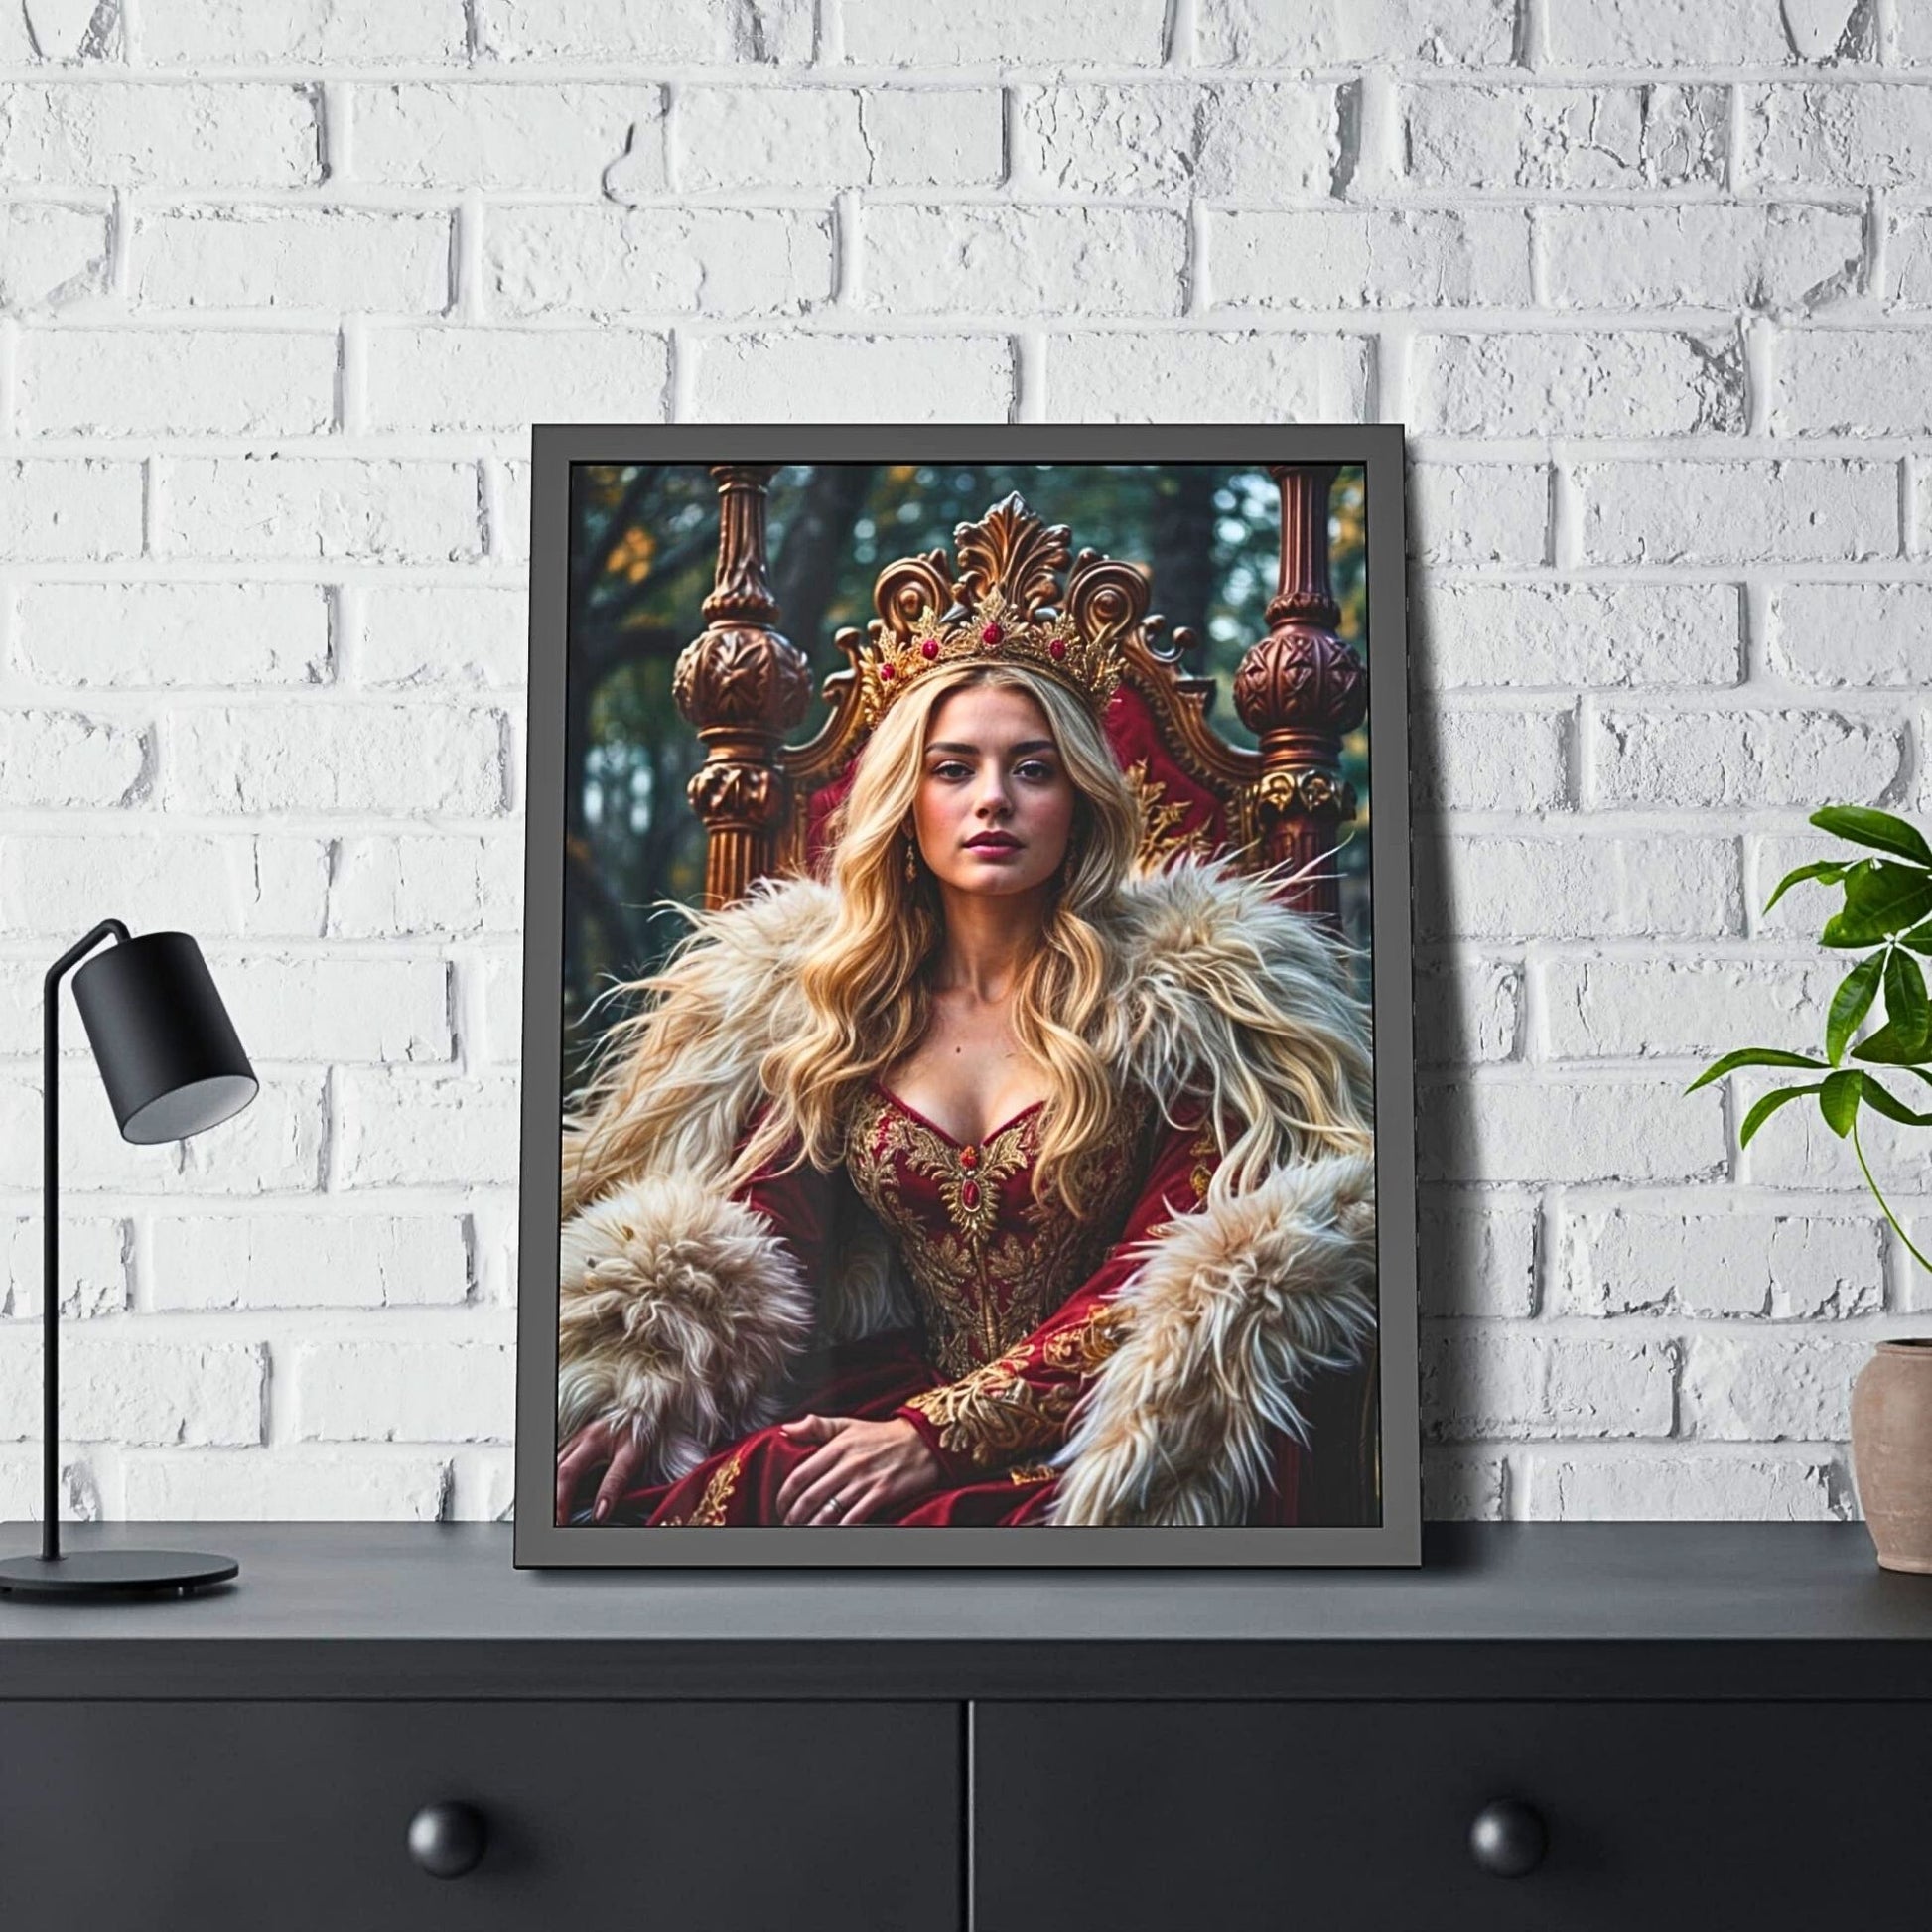 Transform her into a majestic figure with a custom royal portrait, meticulously crafted in the Renaissance style from her photo. This unique and personalized gift idea combines historical allure with a touch of modern elegance, making it perfect for celebrating birthdays or honoring her as a queen in your life. Ideal for those who cherish bespoke art and meaningful gestures.